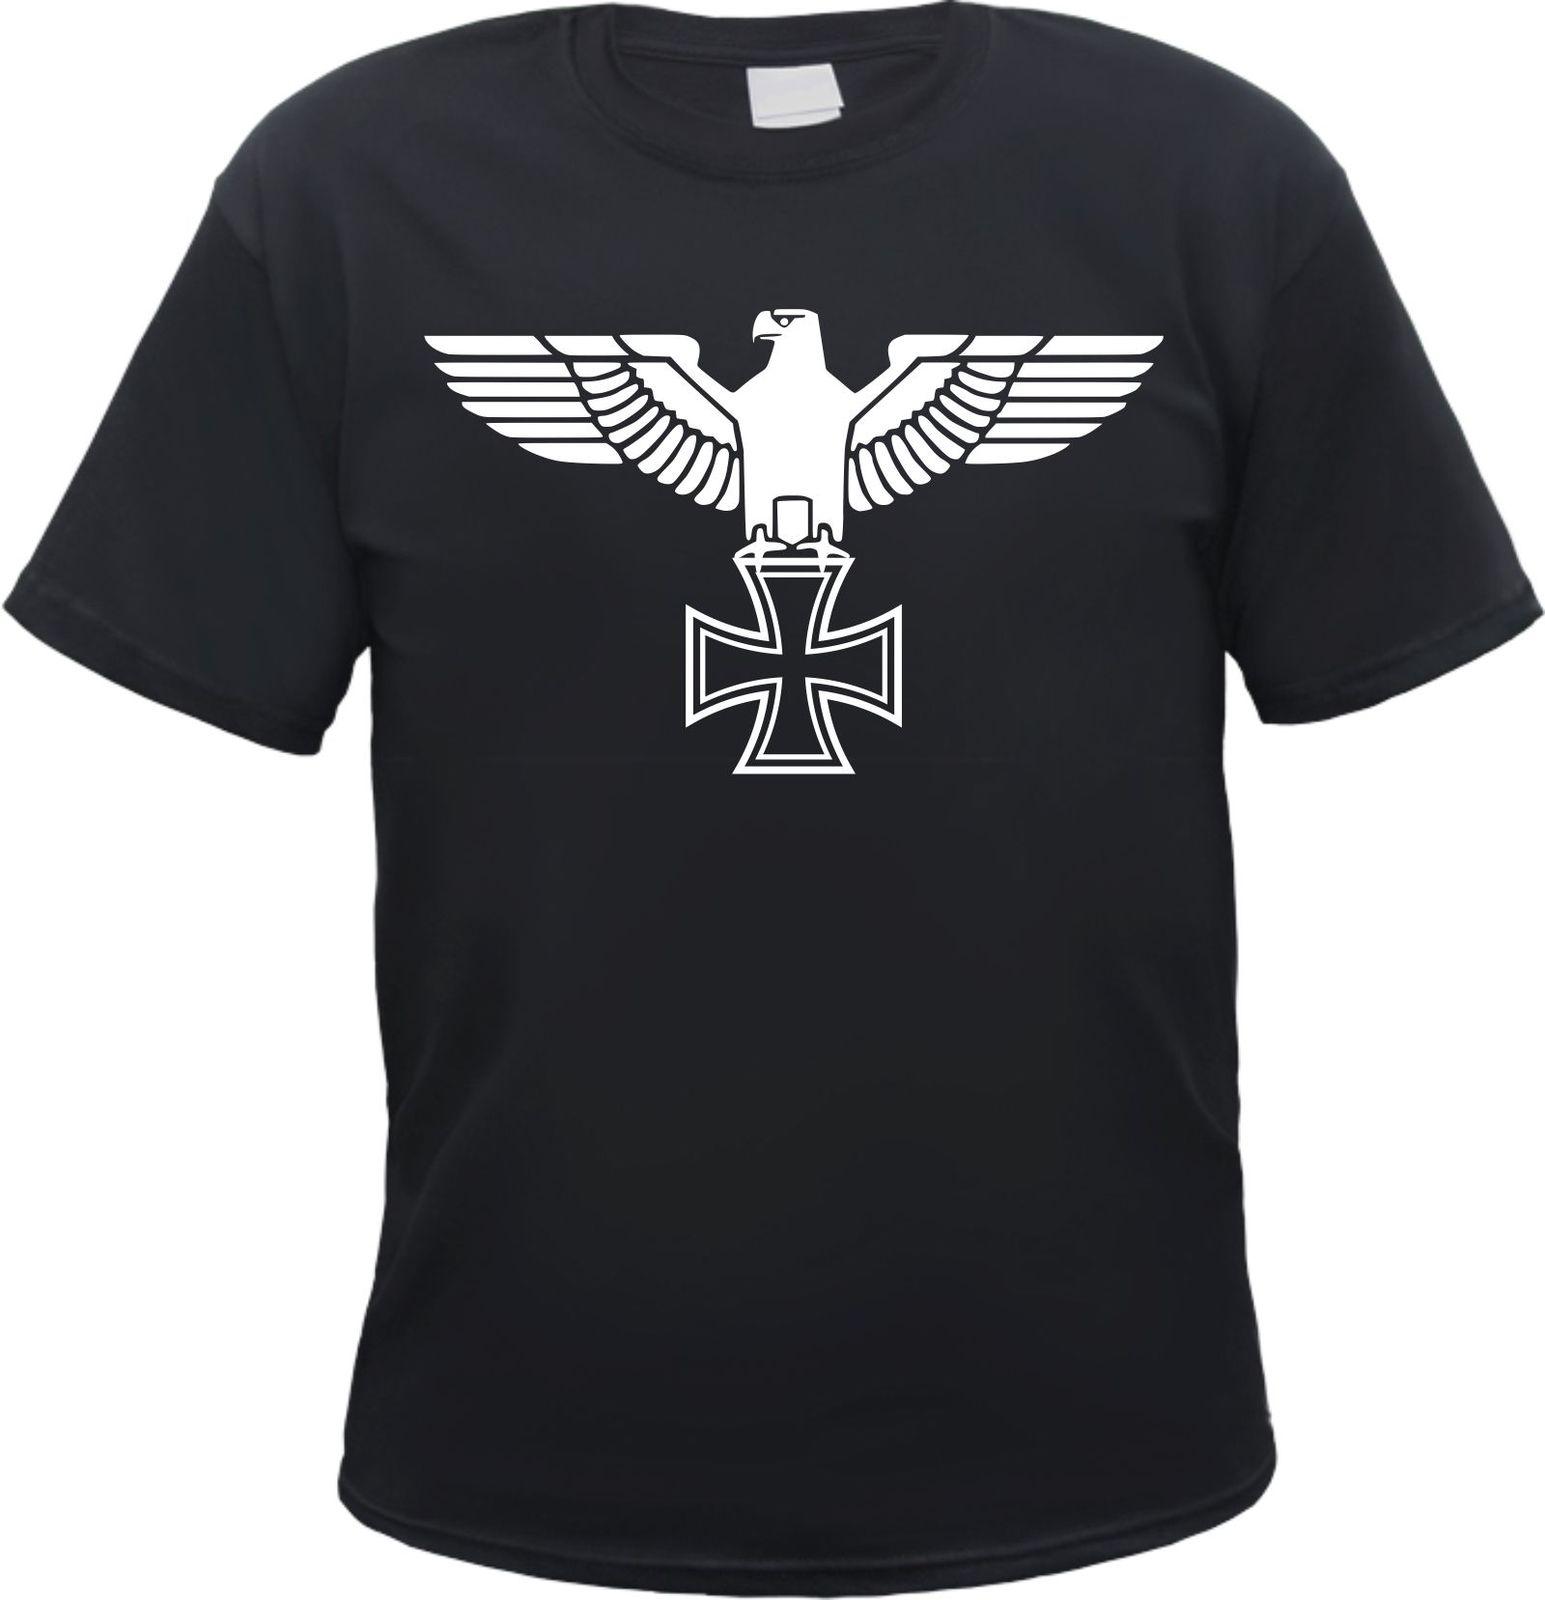 Imperial Eagle T Shirt Iron Cross S To 3xl Black / - T Shirt Birthday Funny , HD Wallpaper & Backgrounds